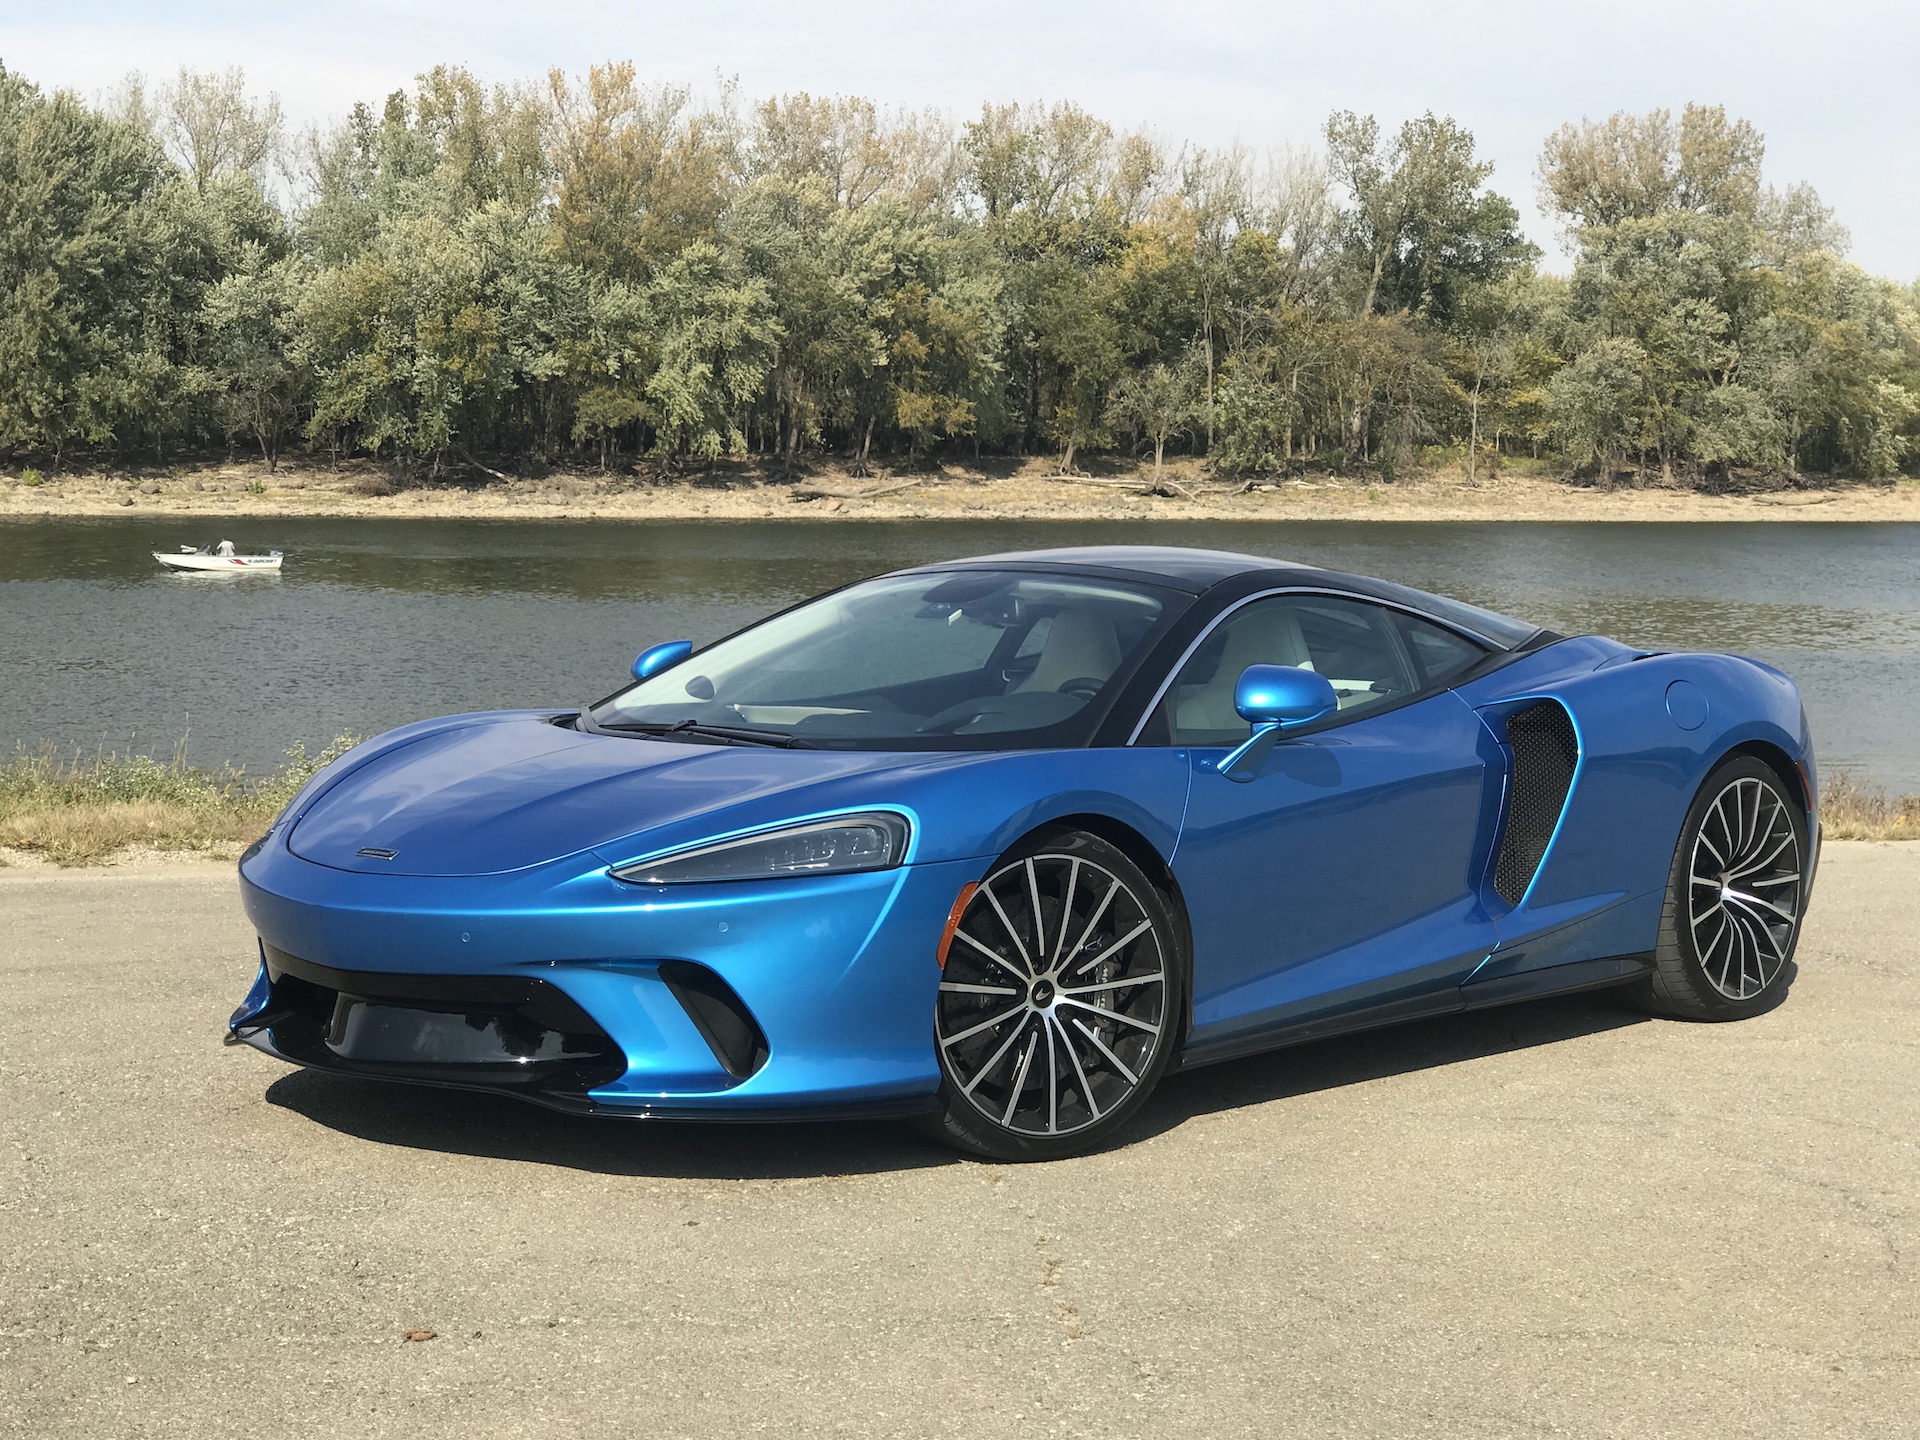 First drive review: 2020 McLaren GT tours grandly with a supercar edge